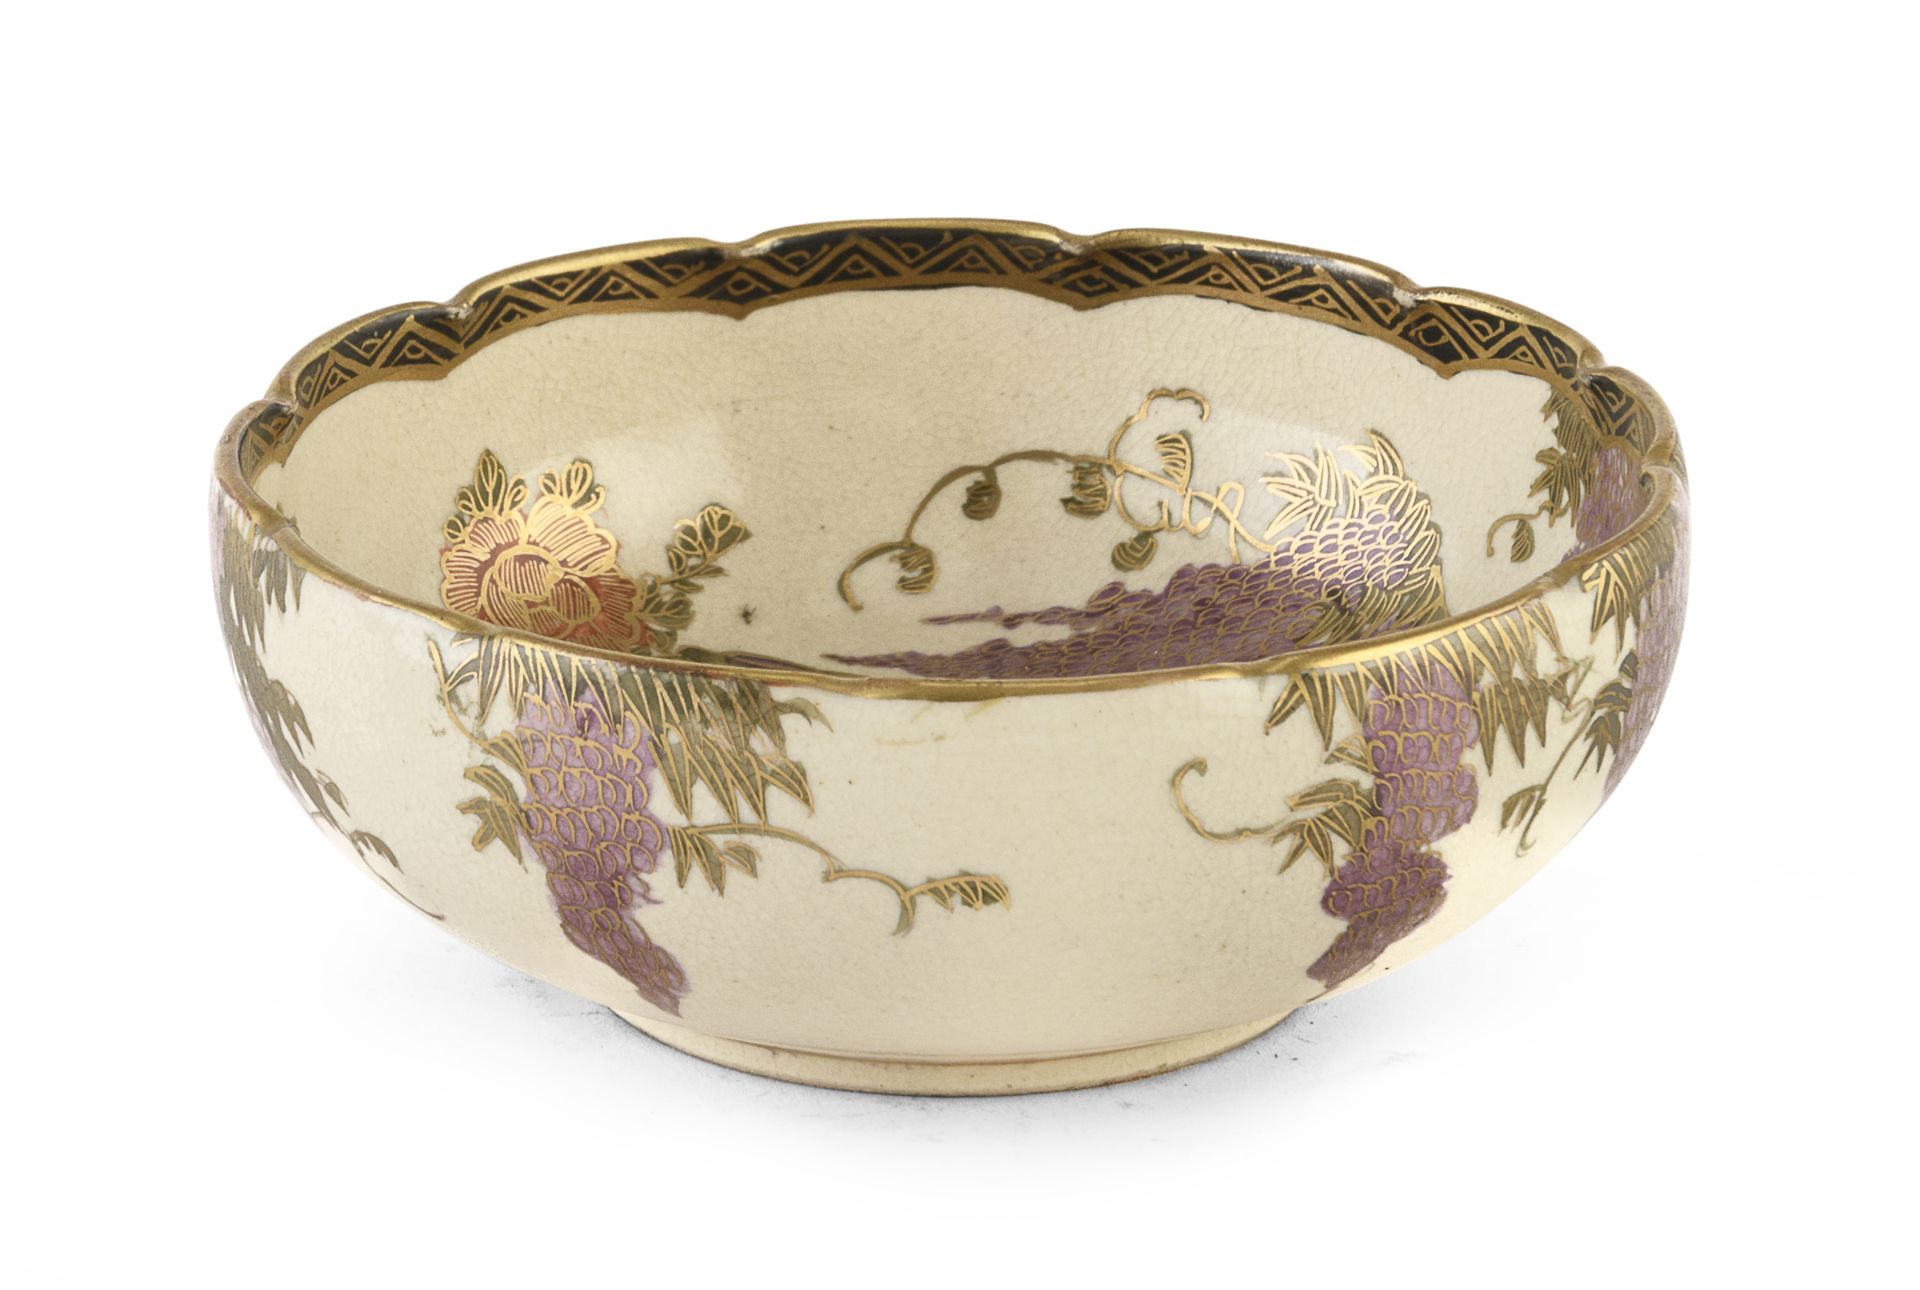 SMALL POLYCHROME ENAMEL AND GOLD CERAMIC BOWL JAPAN LATE 19TH EARLY 20TH CENTURY - Image 2 of 2